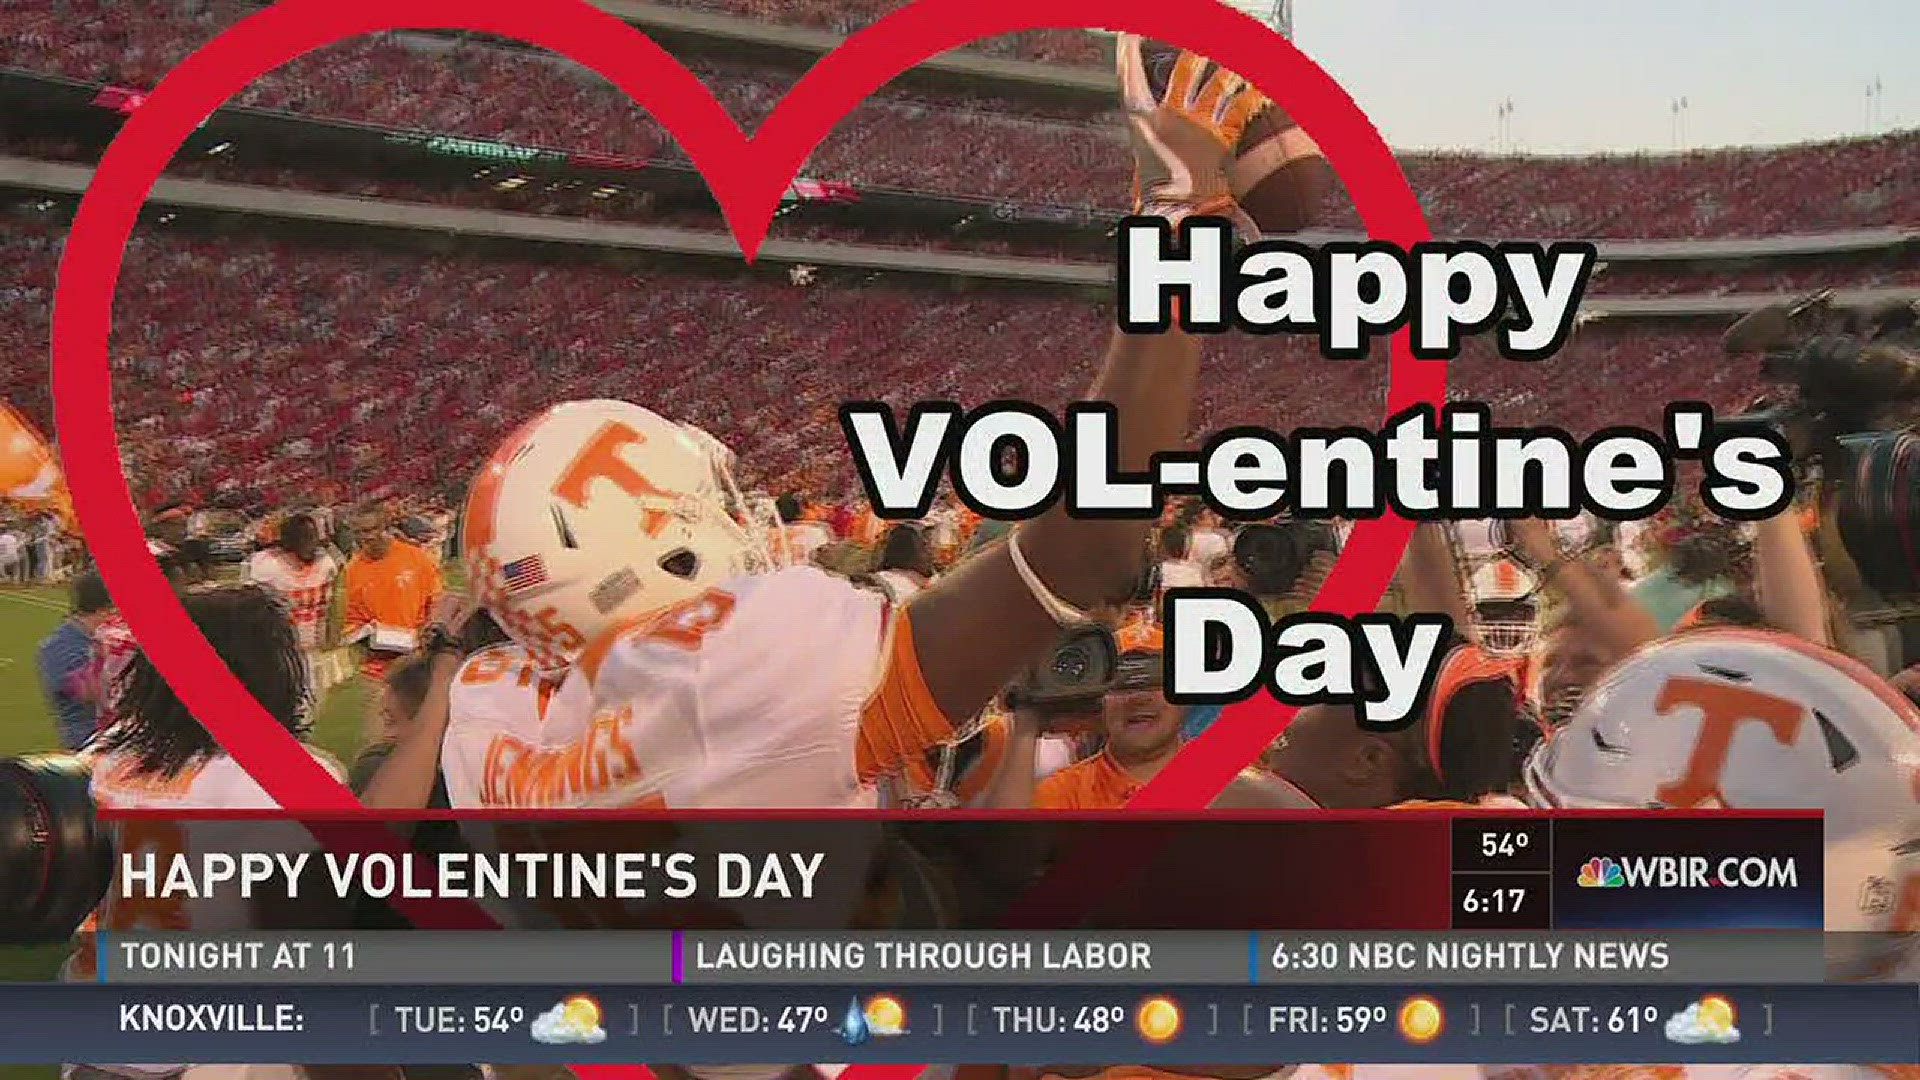 The University of Tennessee's student government association has made some Valentine's Day cards with an East Tennessee twist.